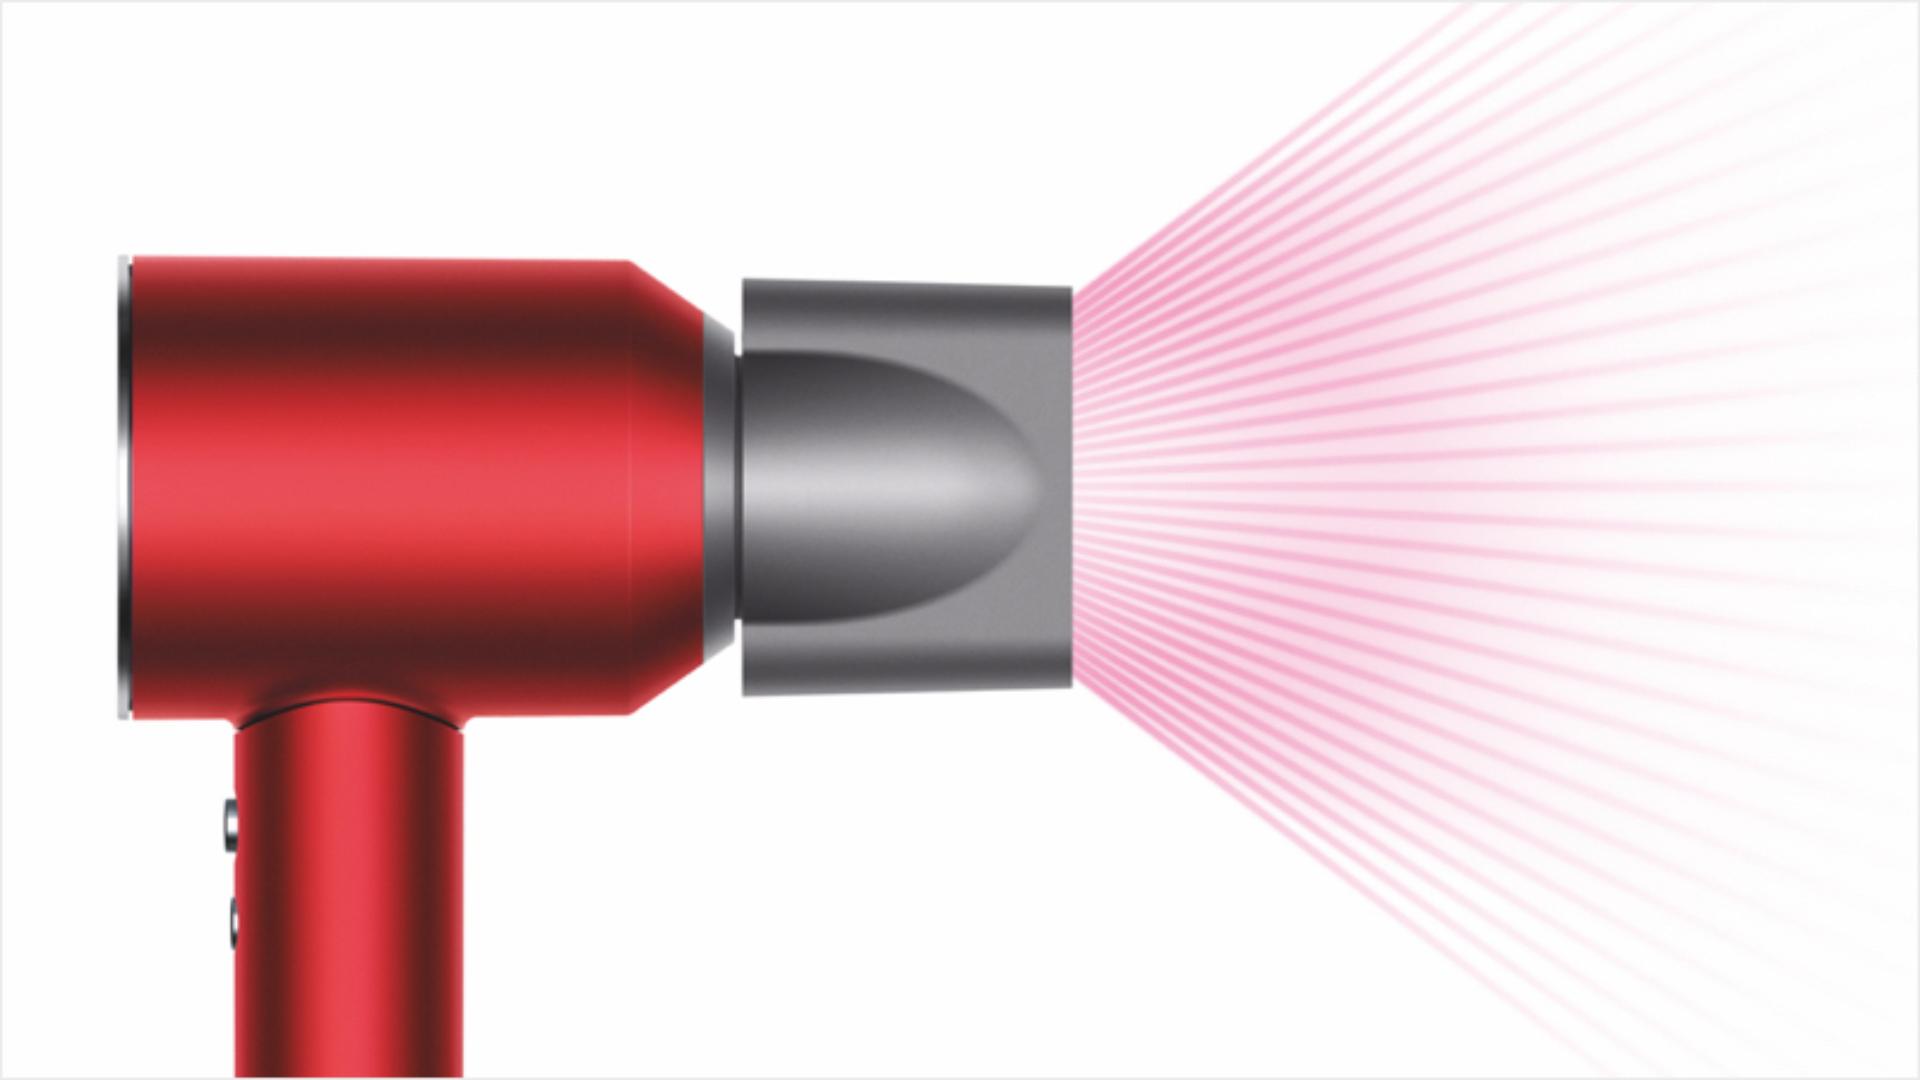 Dyson Supersonic™ hair dryer with Smoothing nozzle attachment